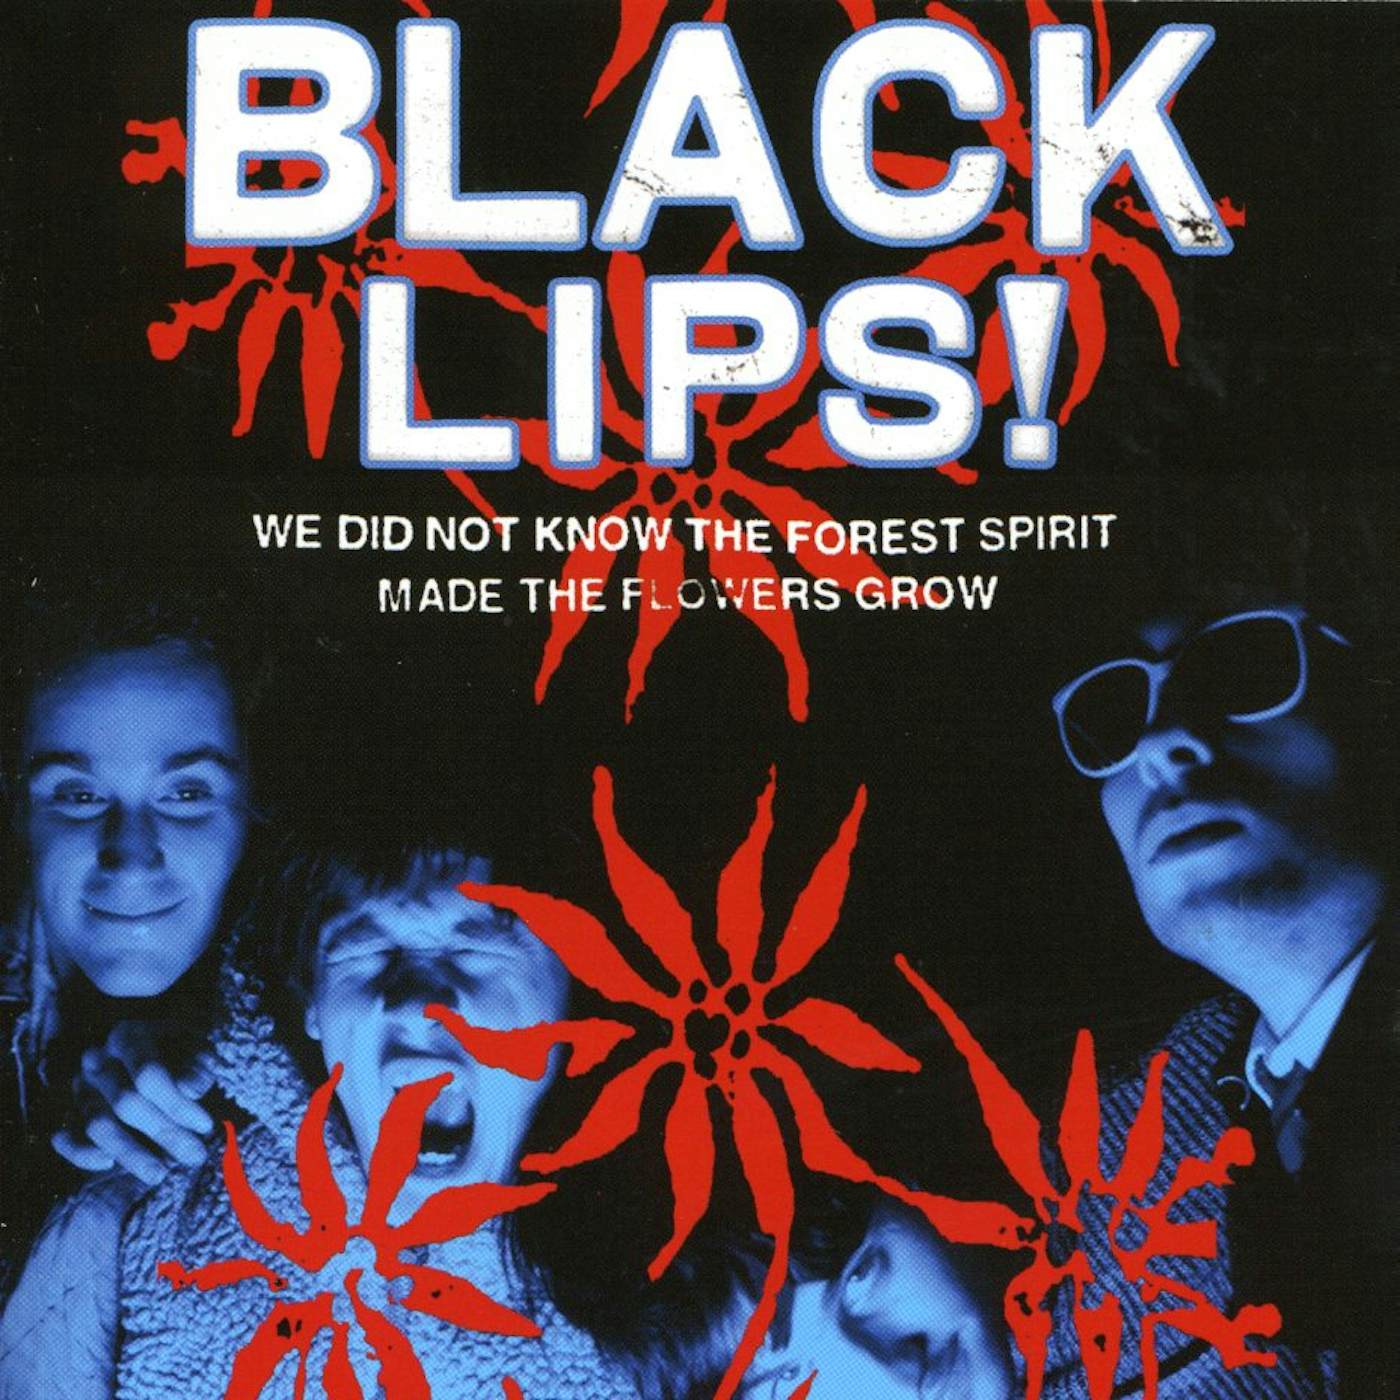 Black Lips WE DID NOT KNOW THE FOREST SPIRIT MADE THE FLOWERS CD